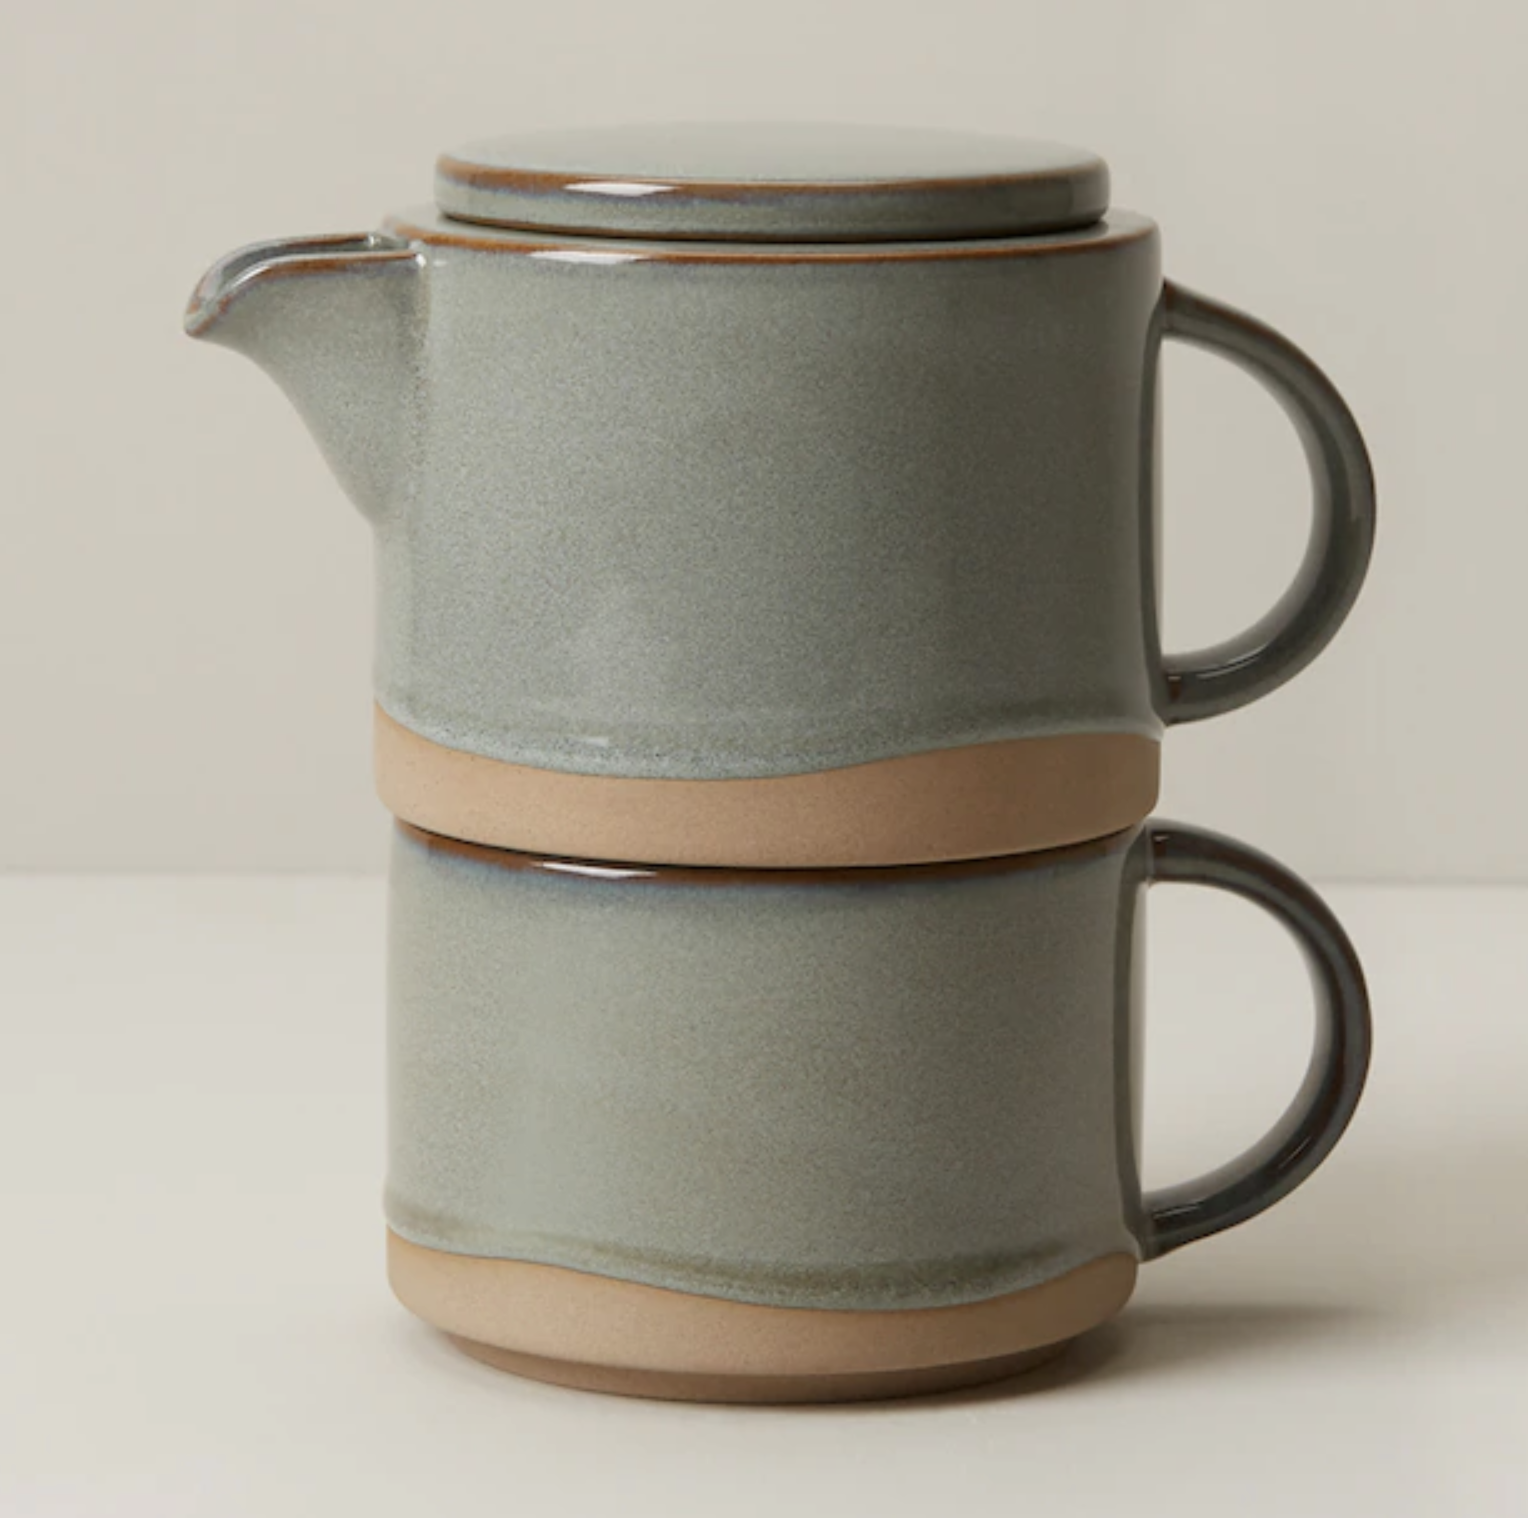 The stacked cup and teapot